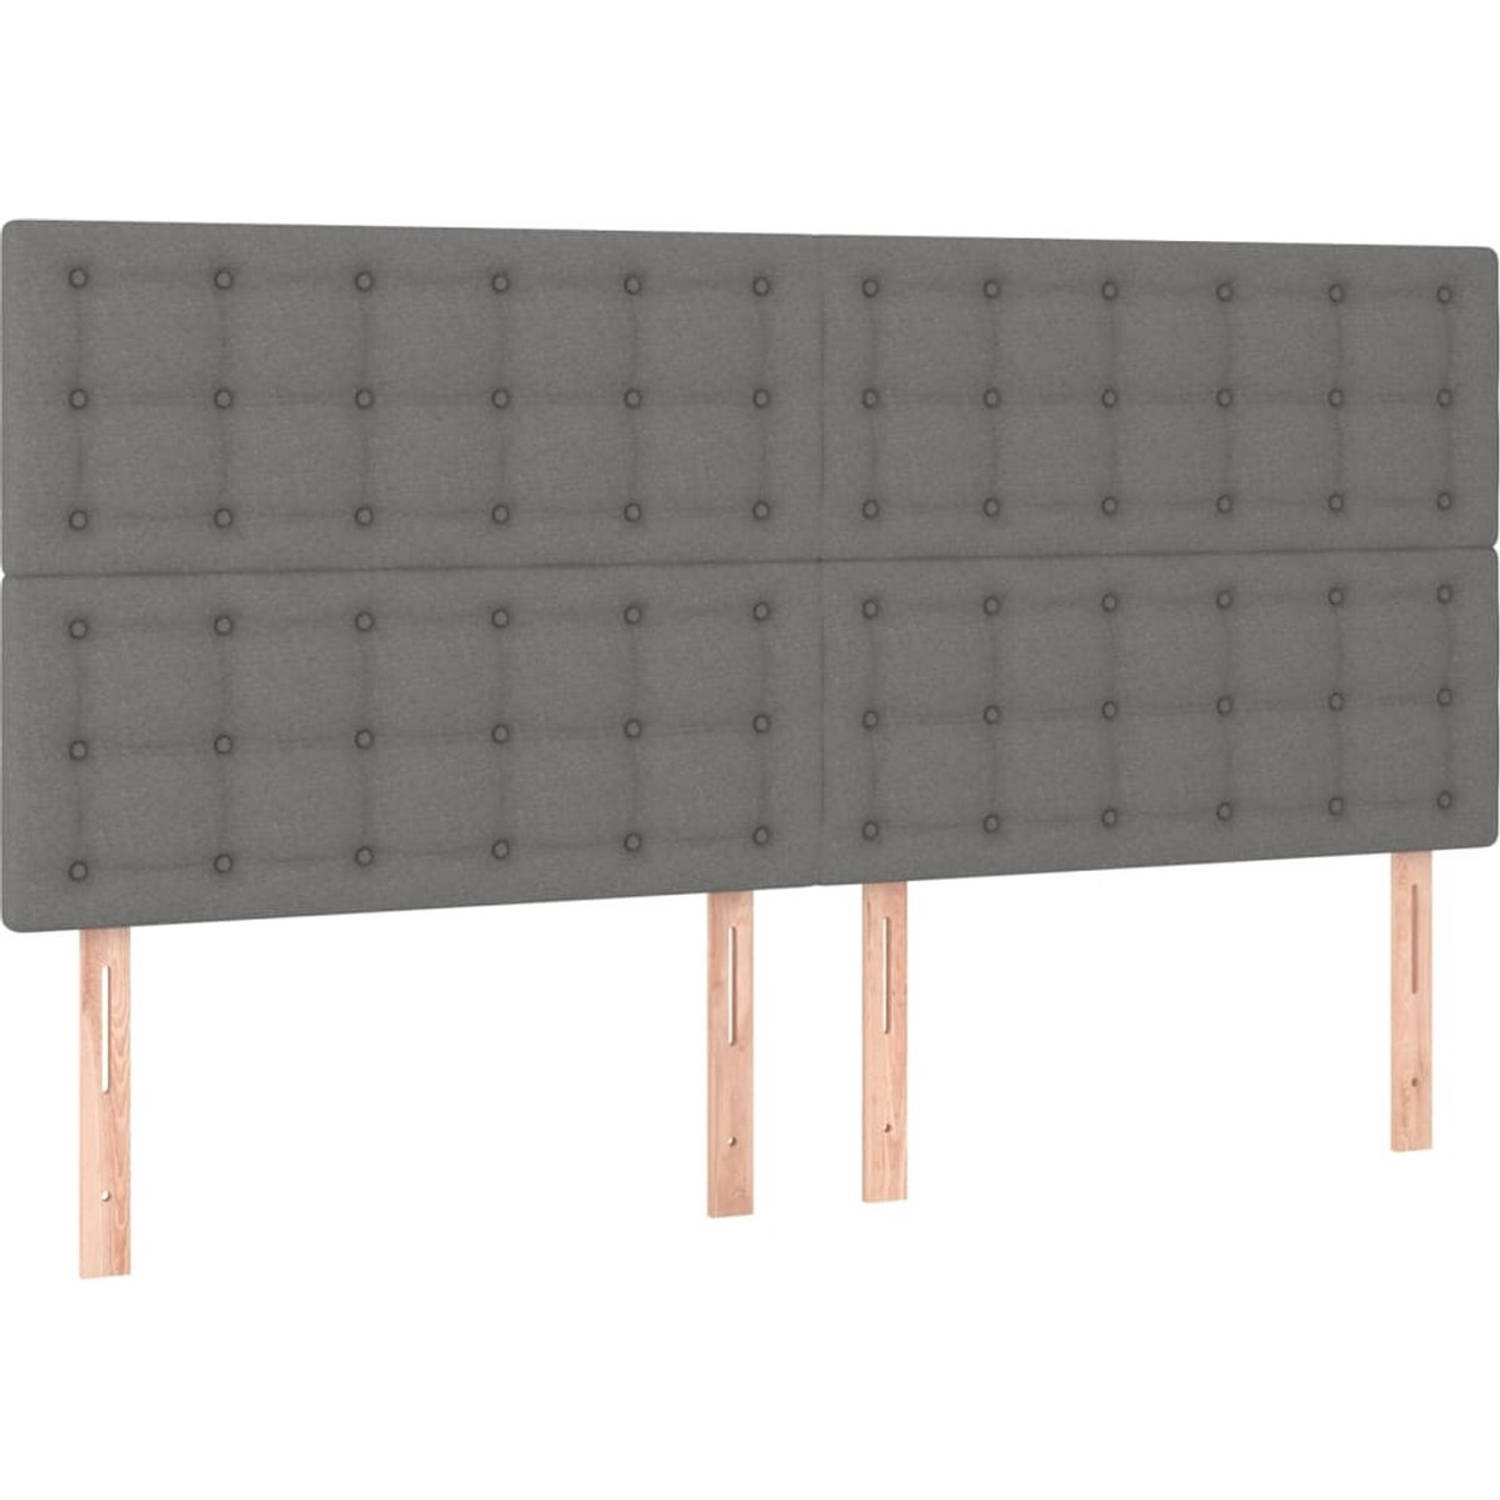 The Living Store Boxspringbed - Comfort - Bed - 203x200x118/128 cm - Donkergrijs